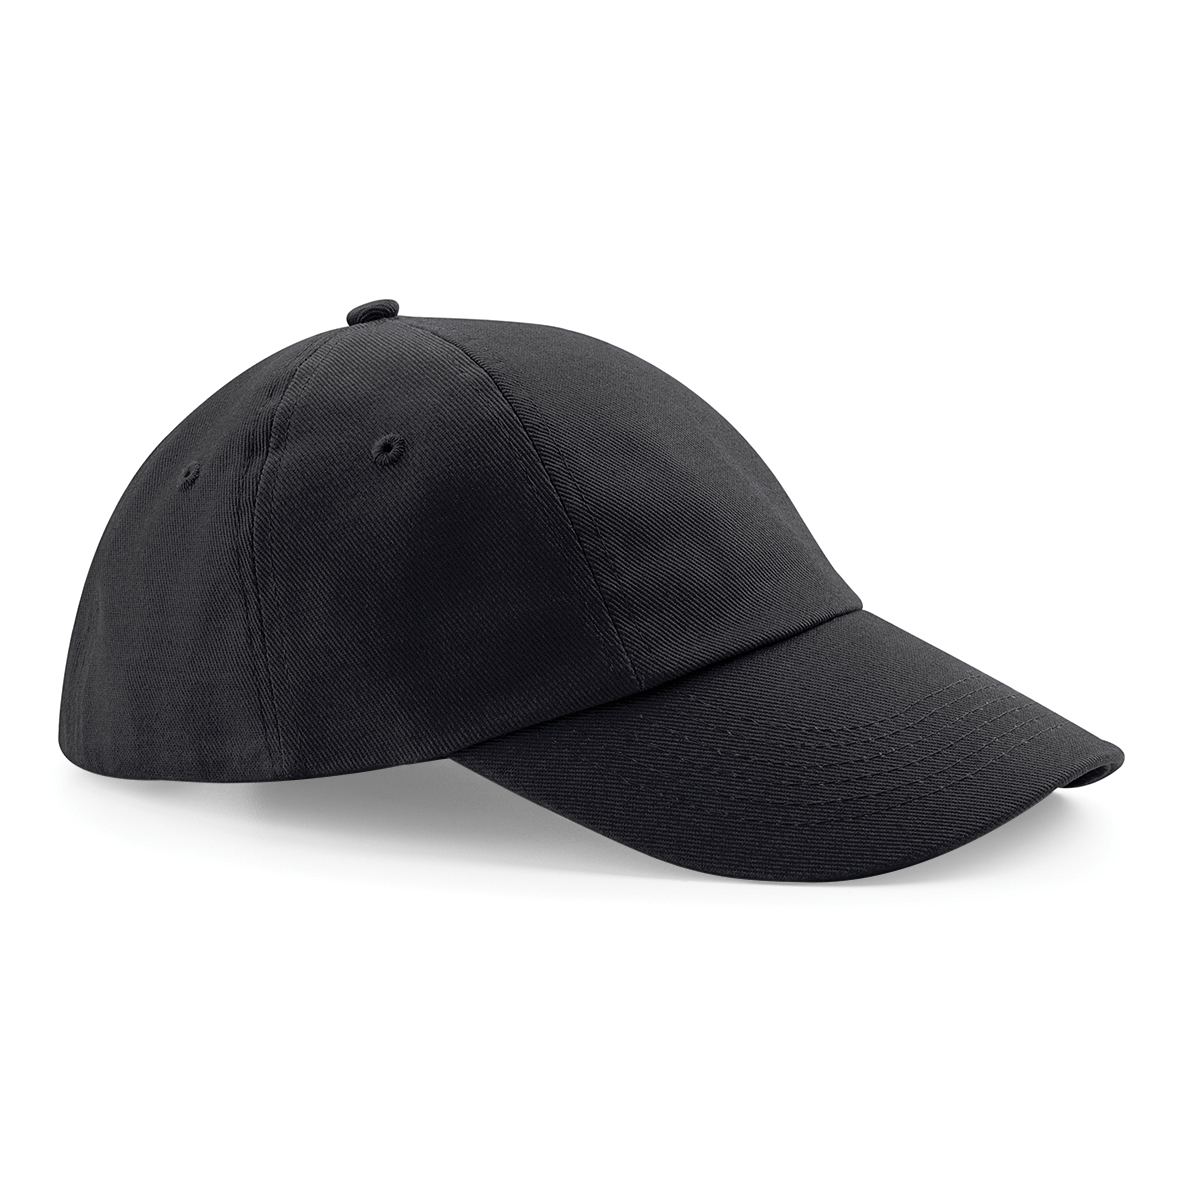 Low Profile Cap in black with seamless, centralised front panel